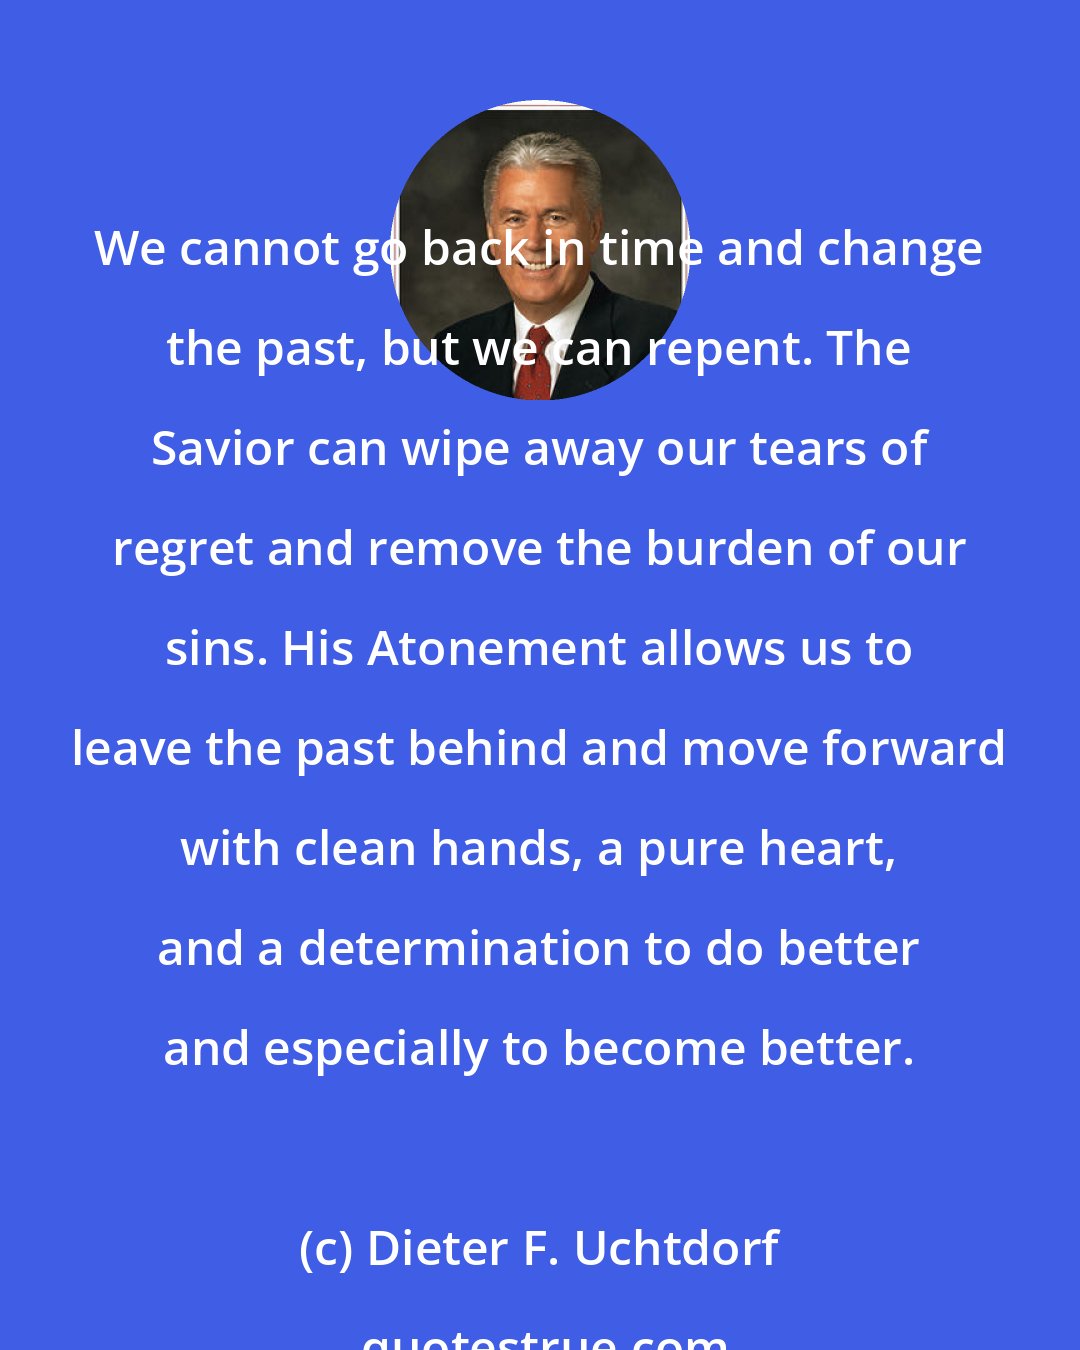 Dieter F. Uchtdorf: We cannot go back in time and change the past, but we can repent. The Savior can wipe away our tears of regret and remove the burden of our sins. His Atonement allows us to leave the past behind and move forward with clean hands, a pure heart, and a determination to do better and especially to become better.